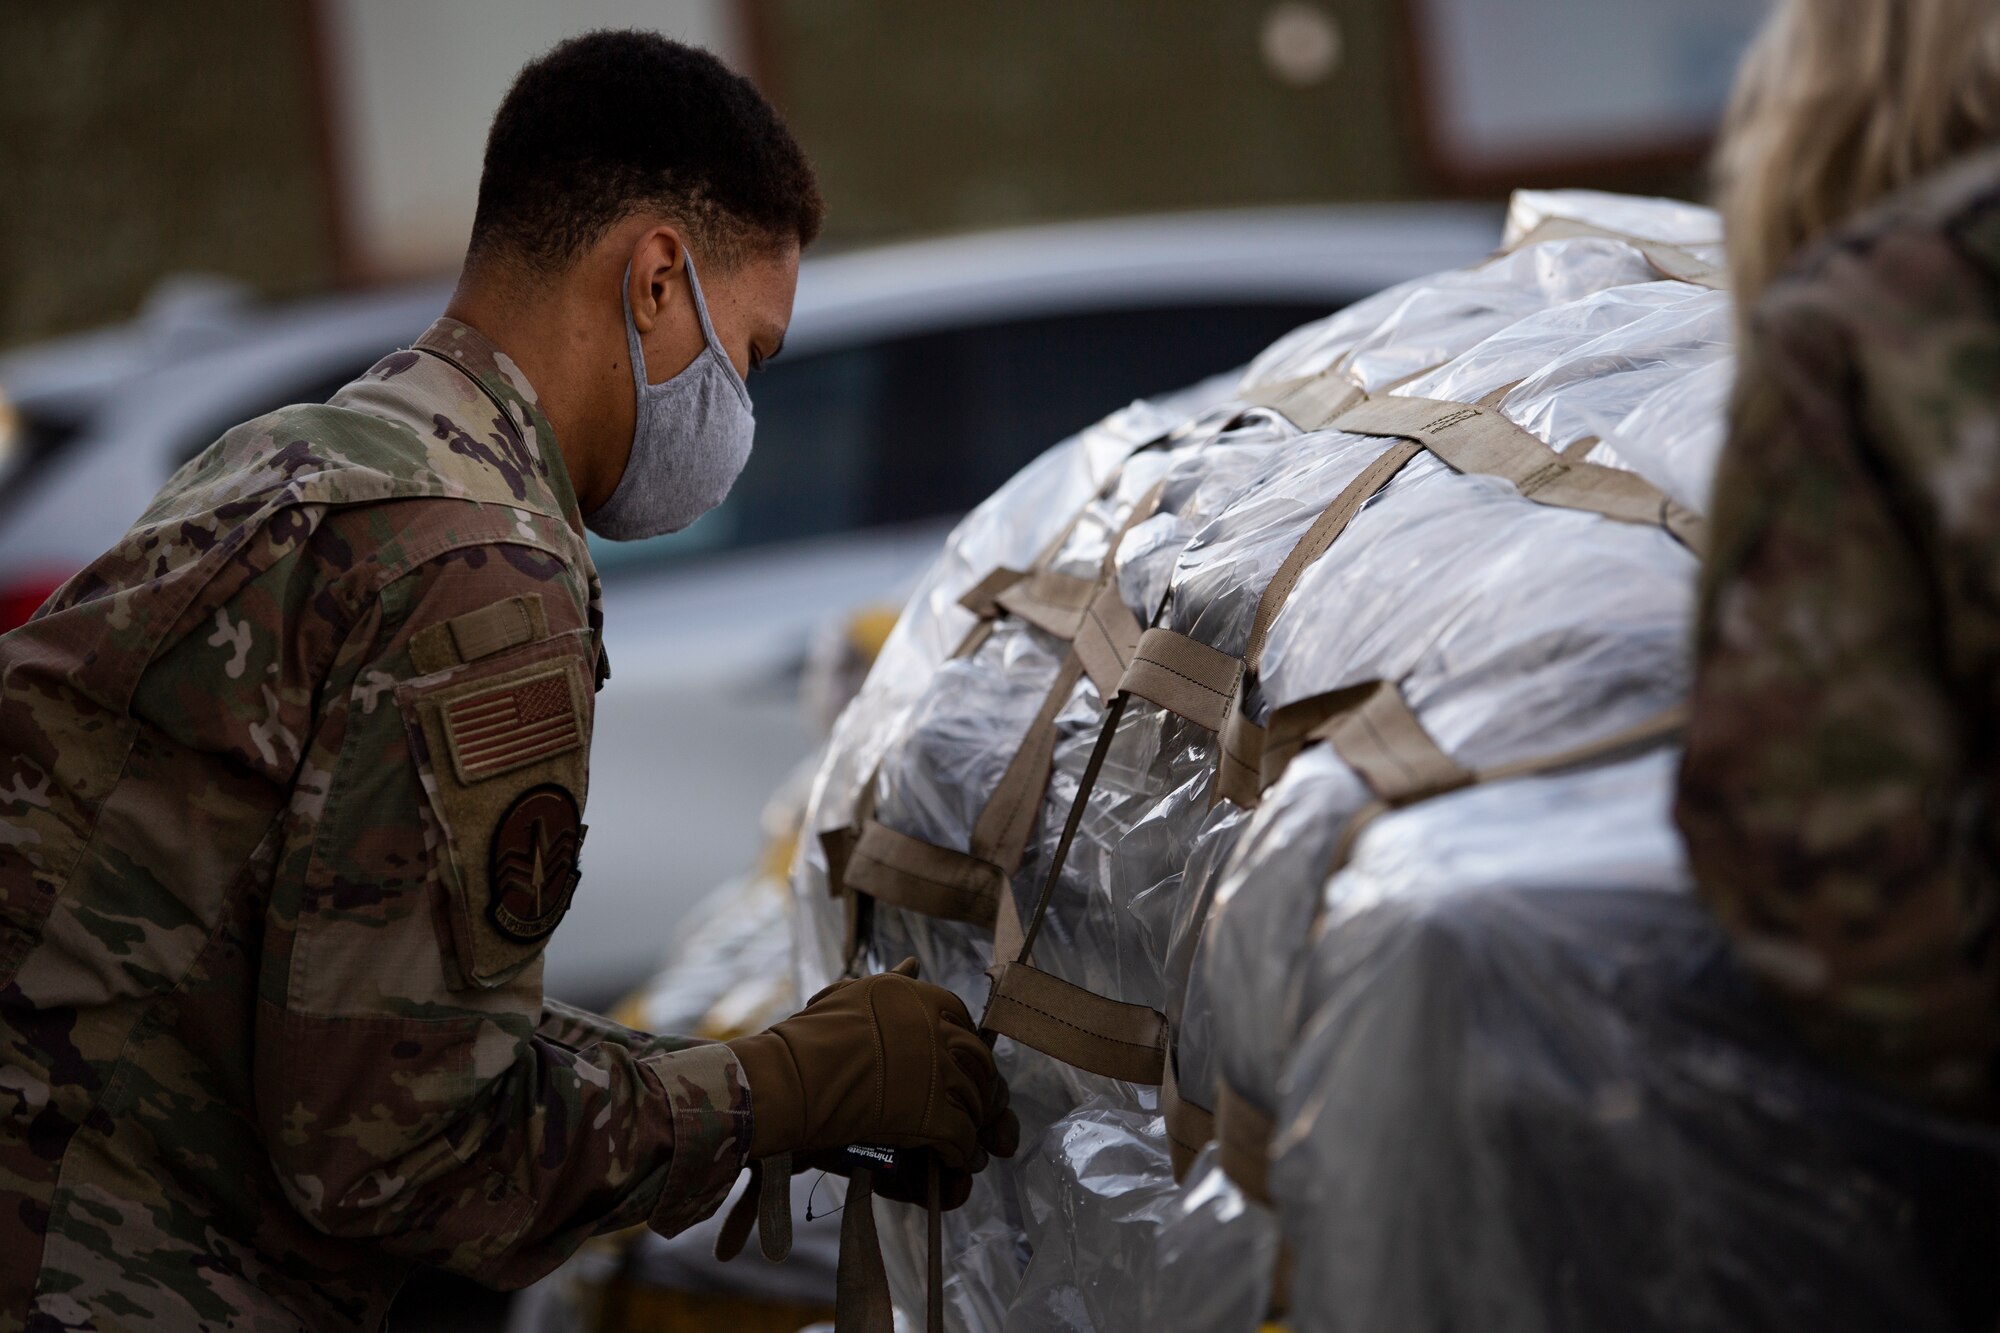 An aircrew flight equipment craftsman, assigned to the 9th Expeditionary Bomb Squadron, disassembles packaged cargo at Orland Air Force Station, Norway, Feb. 23, 2021. A variety of mission support cargo was transported to Ørland Air Force Station for a Bomber Task Force Europe deployment. BTFs give Airmen the opportunity to integrate and train with ally and partner forces. (U.S. Air Force photo by Airman 1st Class Colin Hollowell)